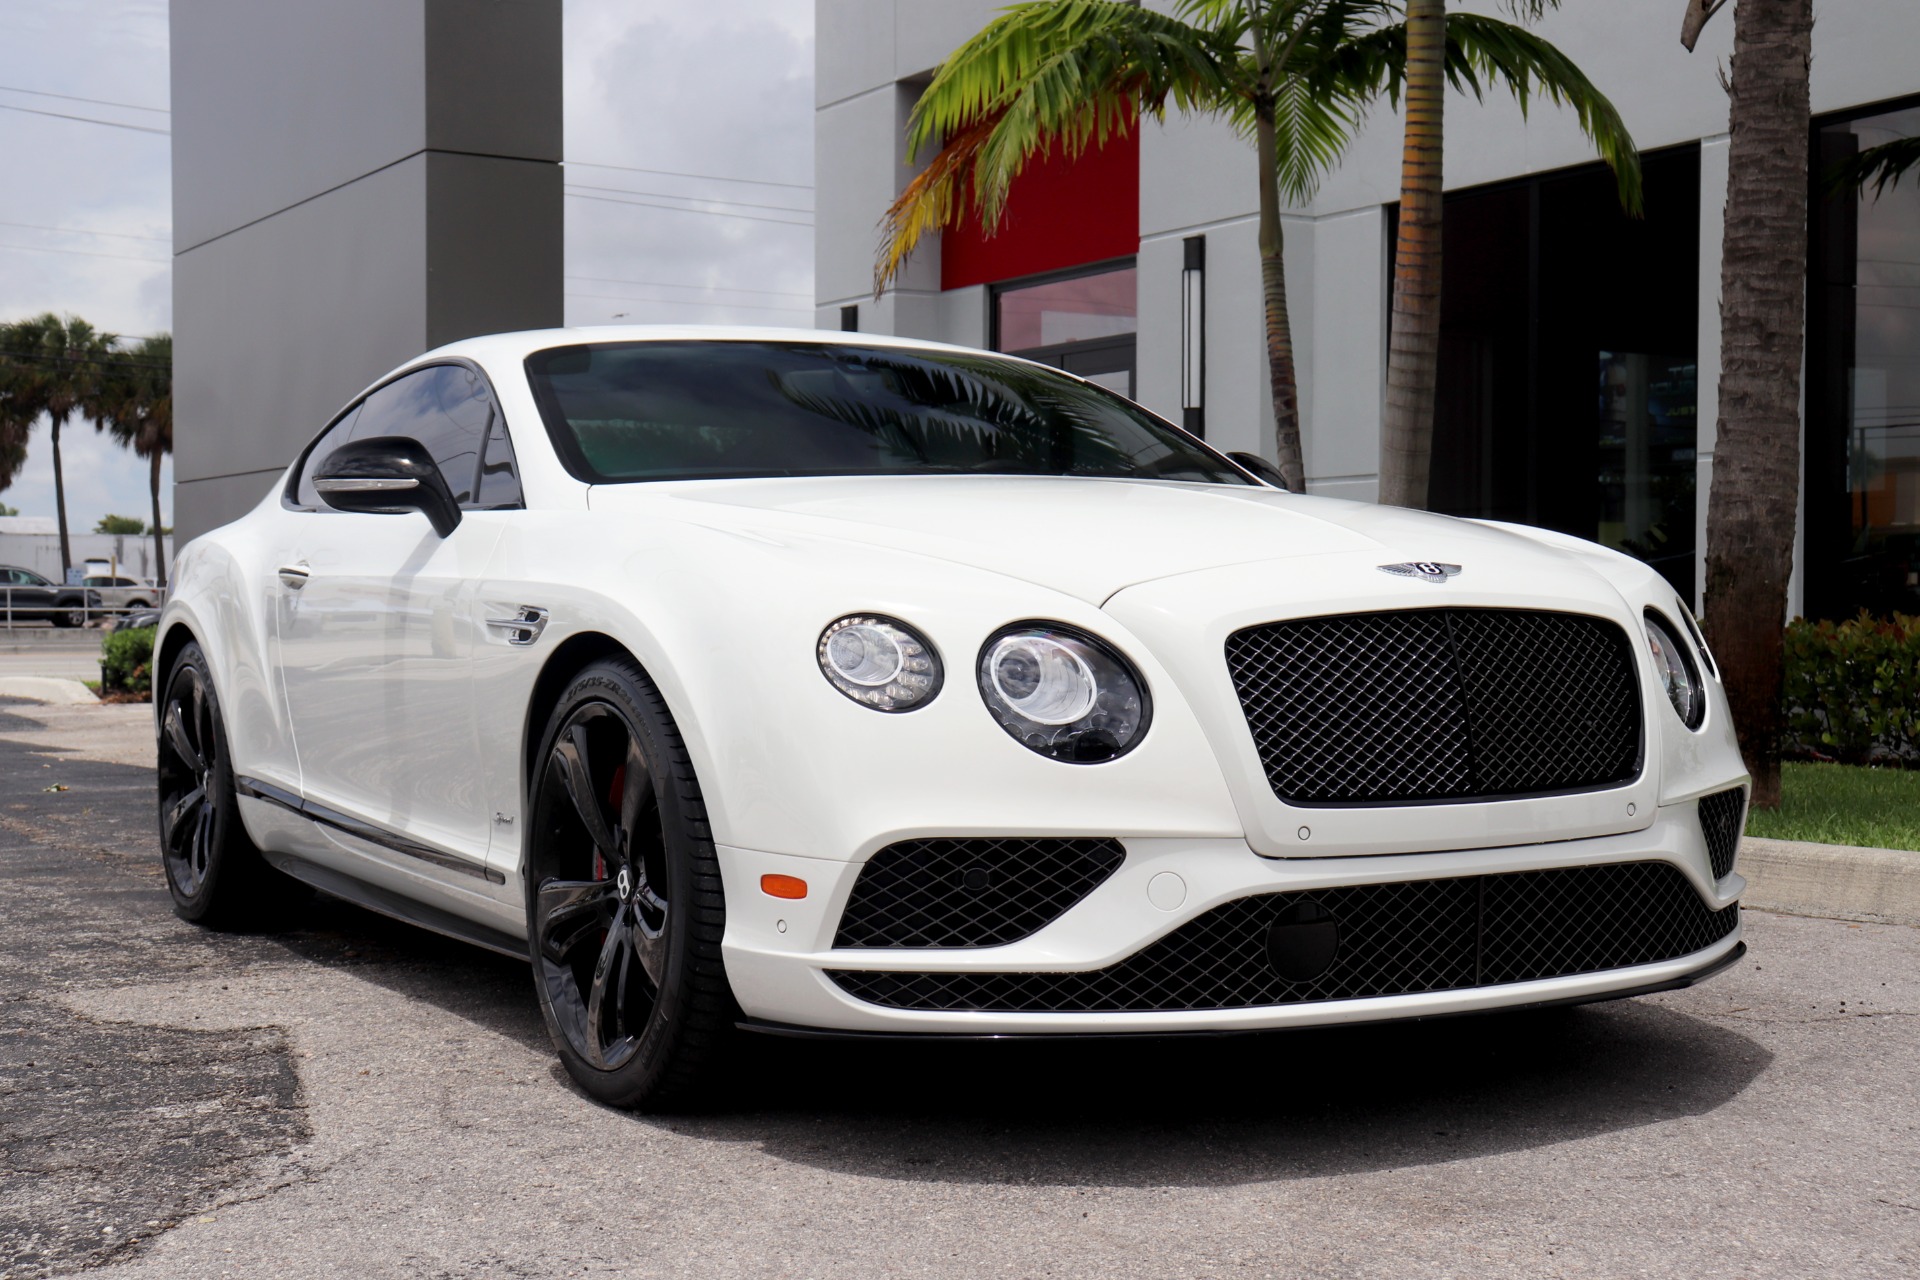 Class And Speed: The 2017 Bentley Continental GT Speed Black Edition